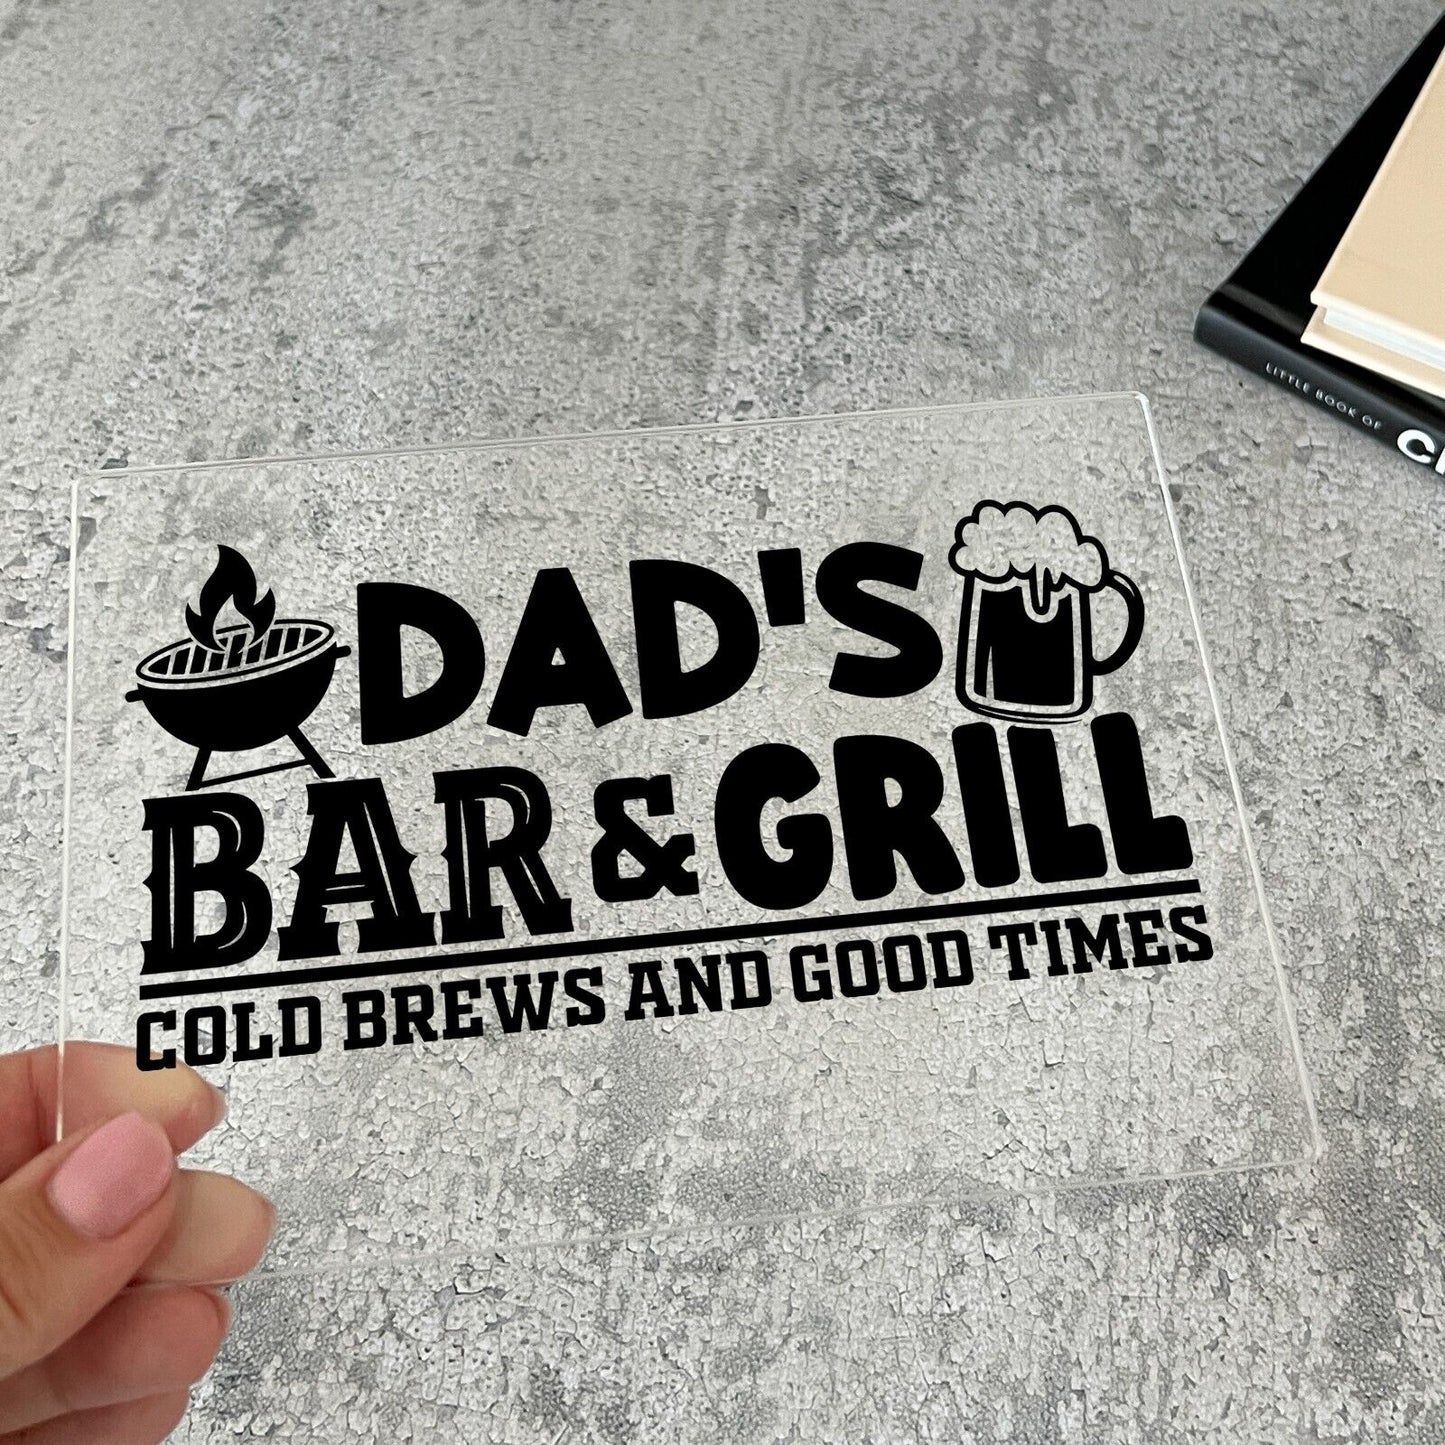 Personalized Wooden Plaque Dads Bar & Grill Cold Brews and Good Times Gift